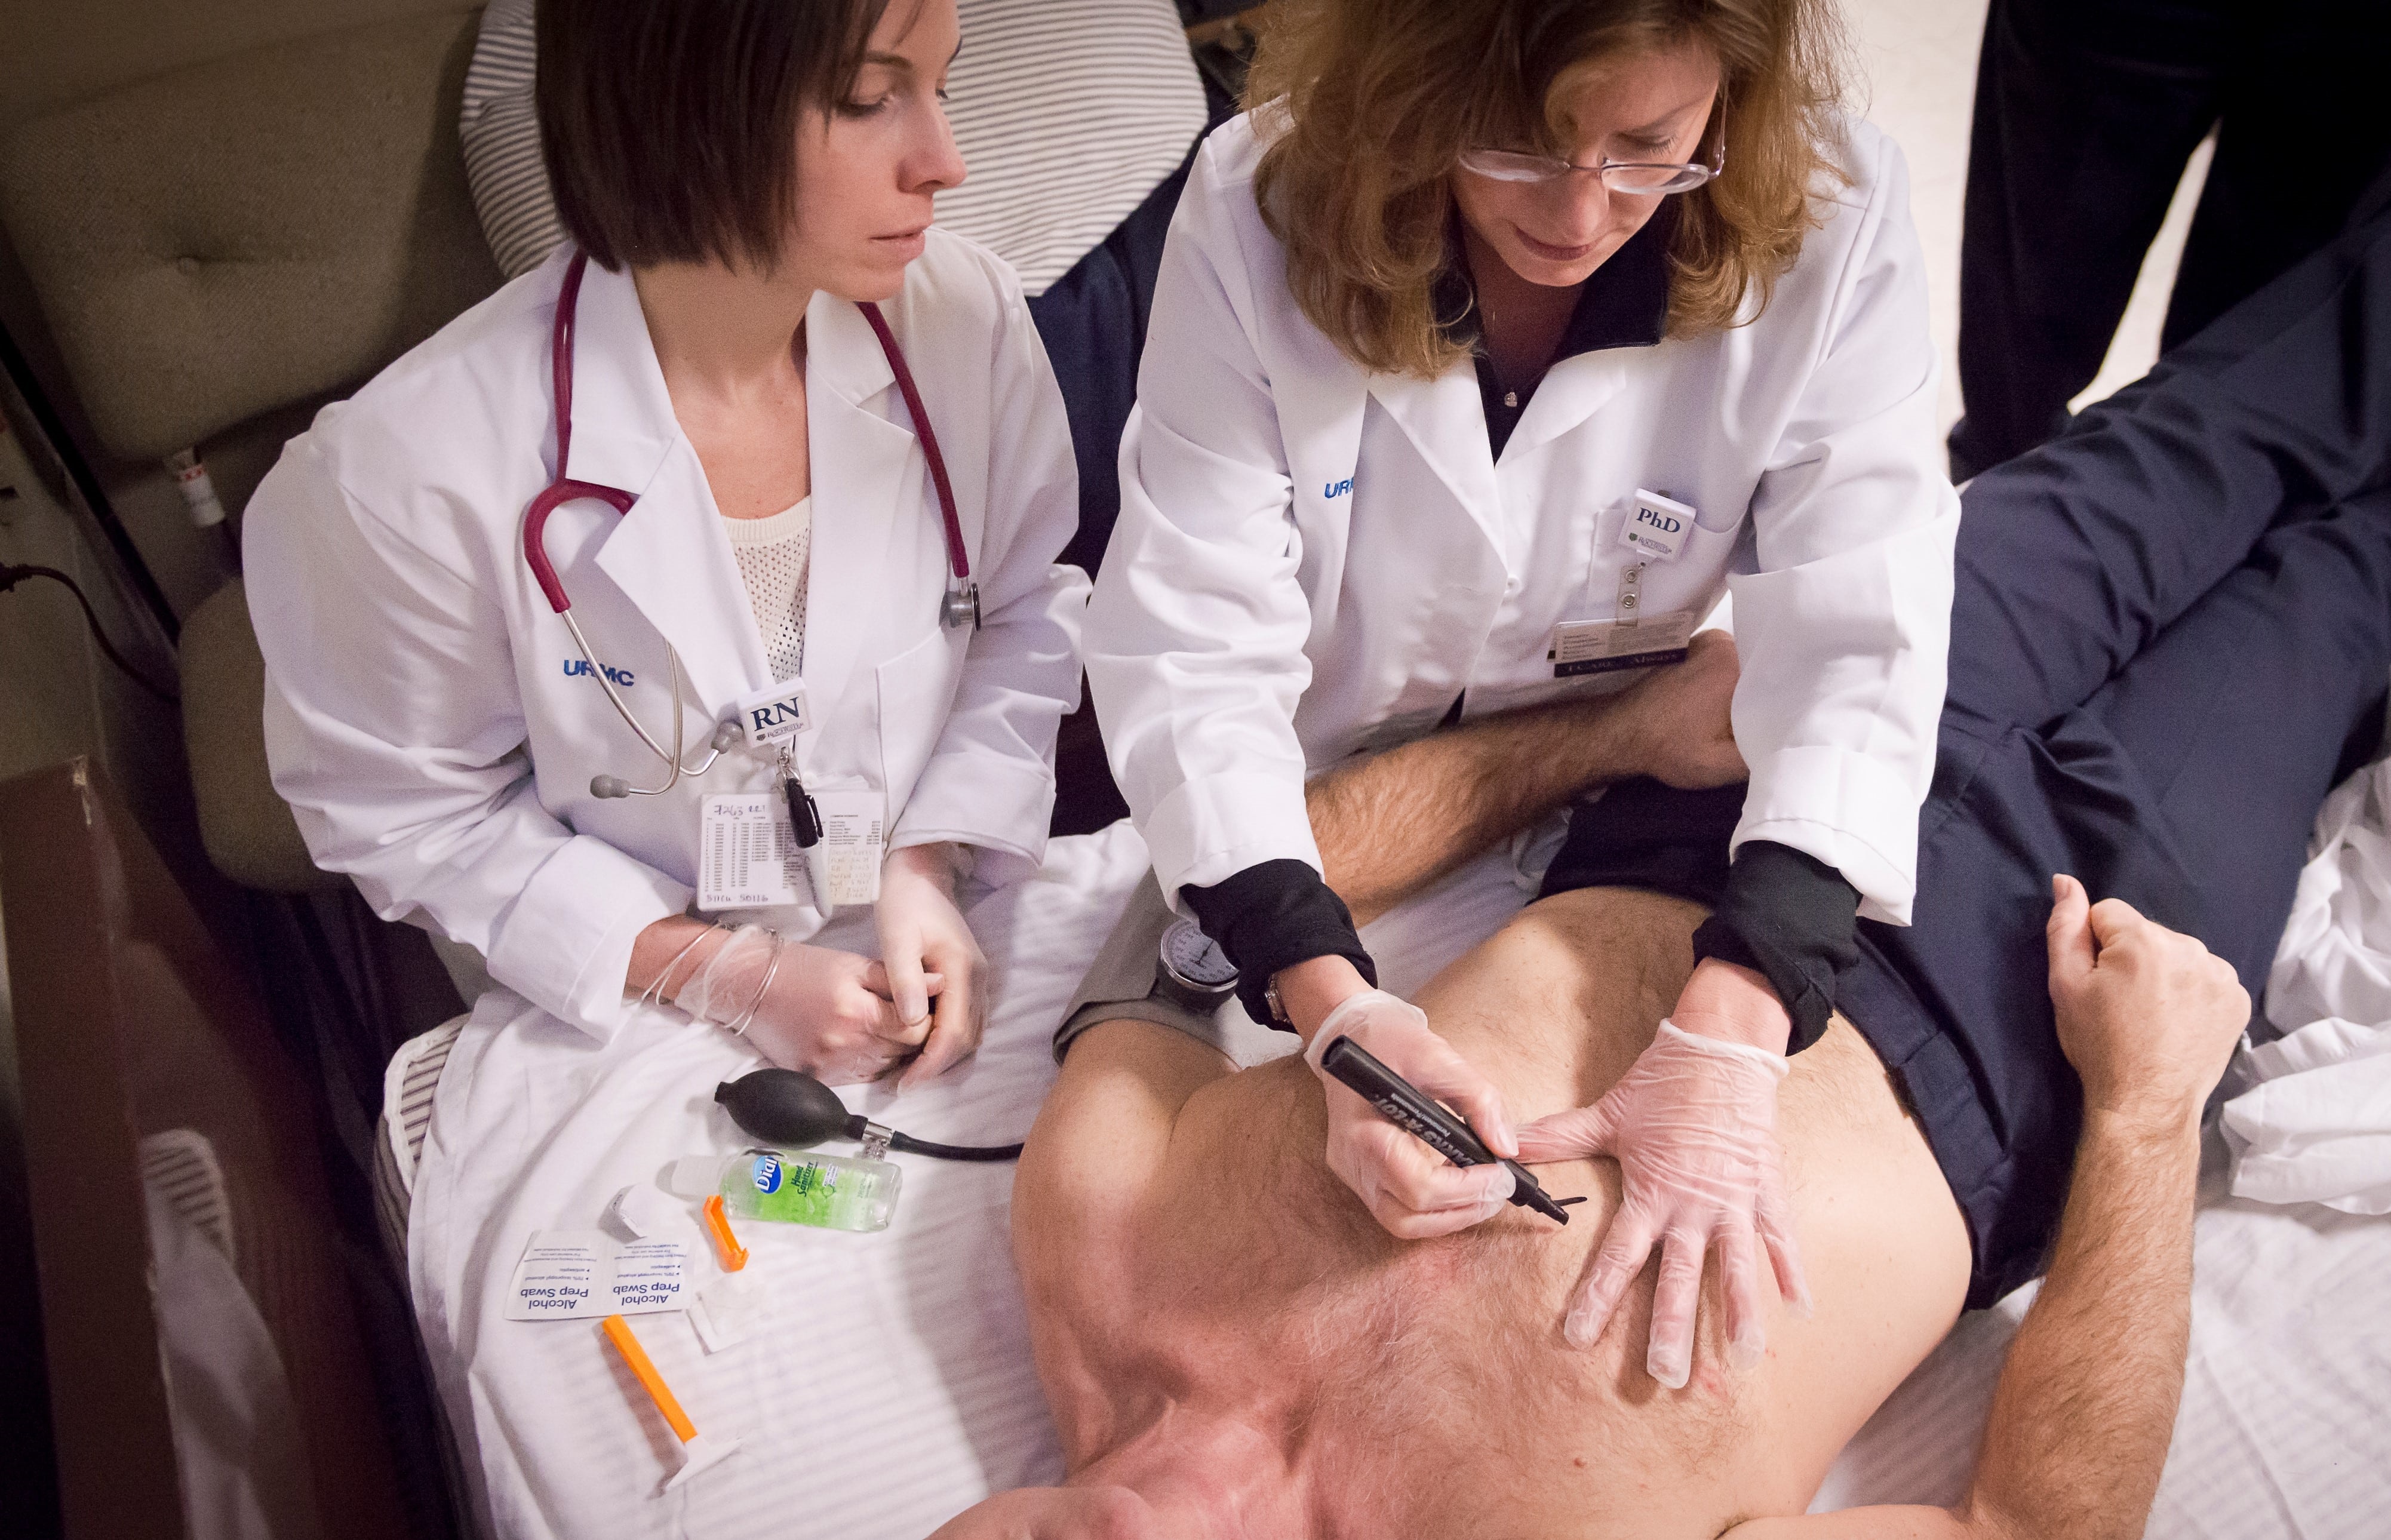 Two nurses sit next to a bed where a shirtless man lies on his back. One nurse uses a marker to make an X on the man's chest. 